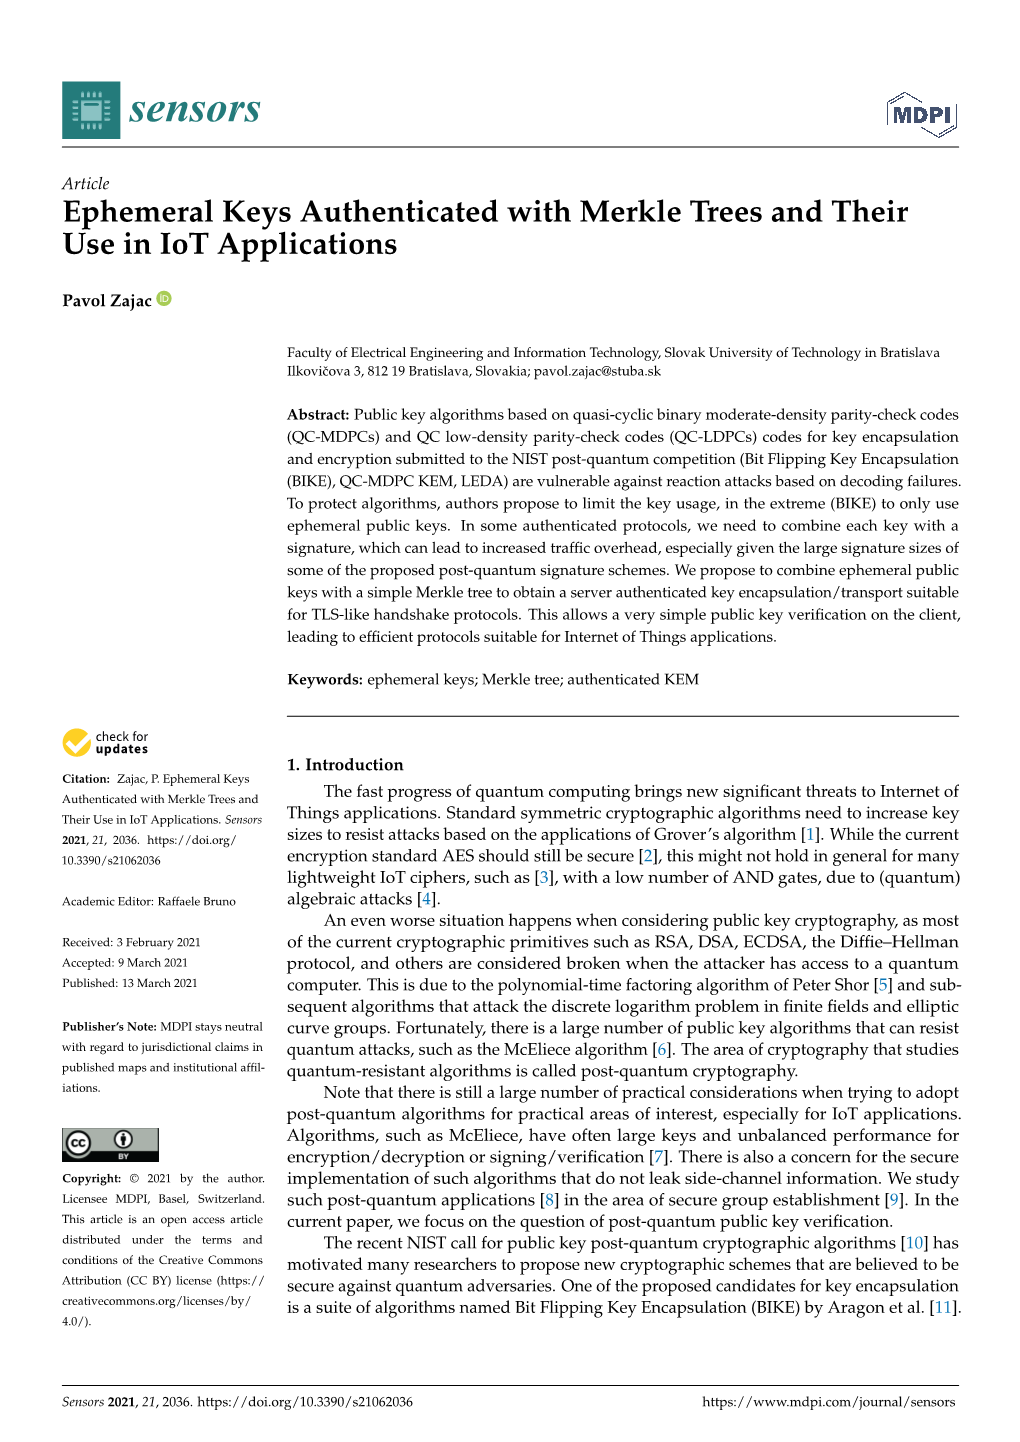 Ephemeral Keys Authenticated with Merkle Trees and Their Use in Iot Applications